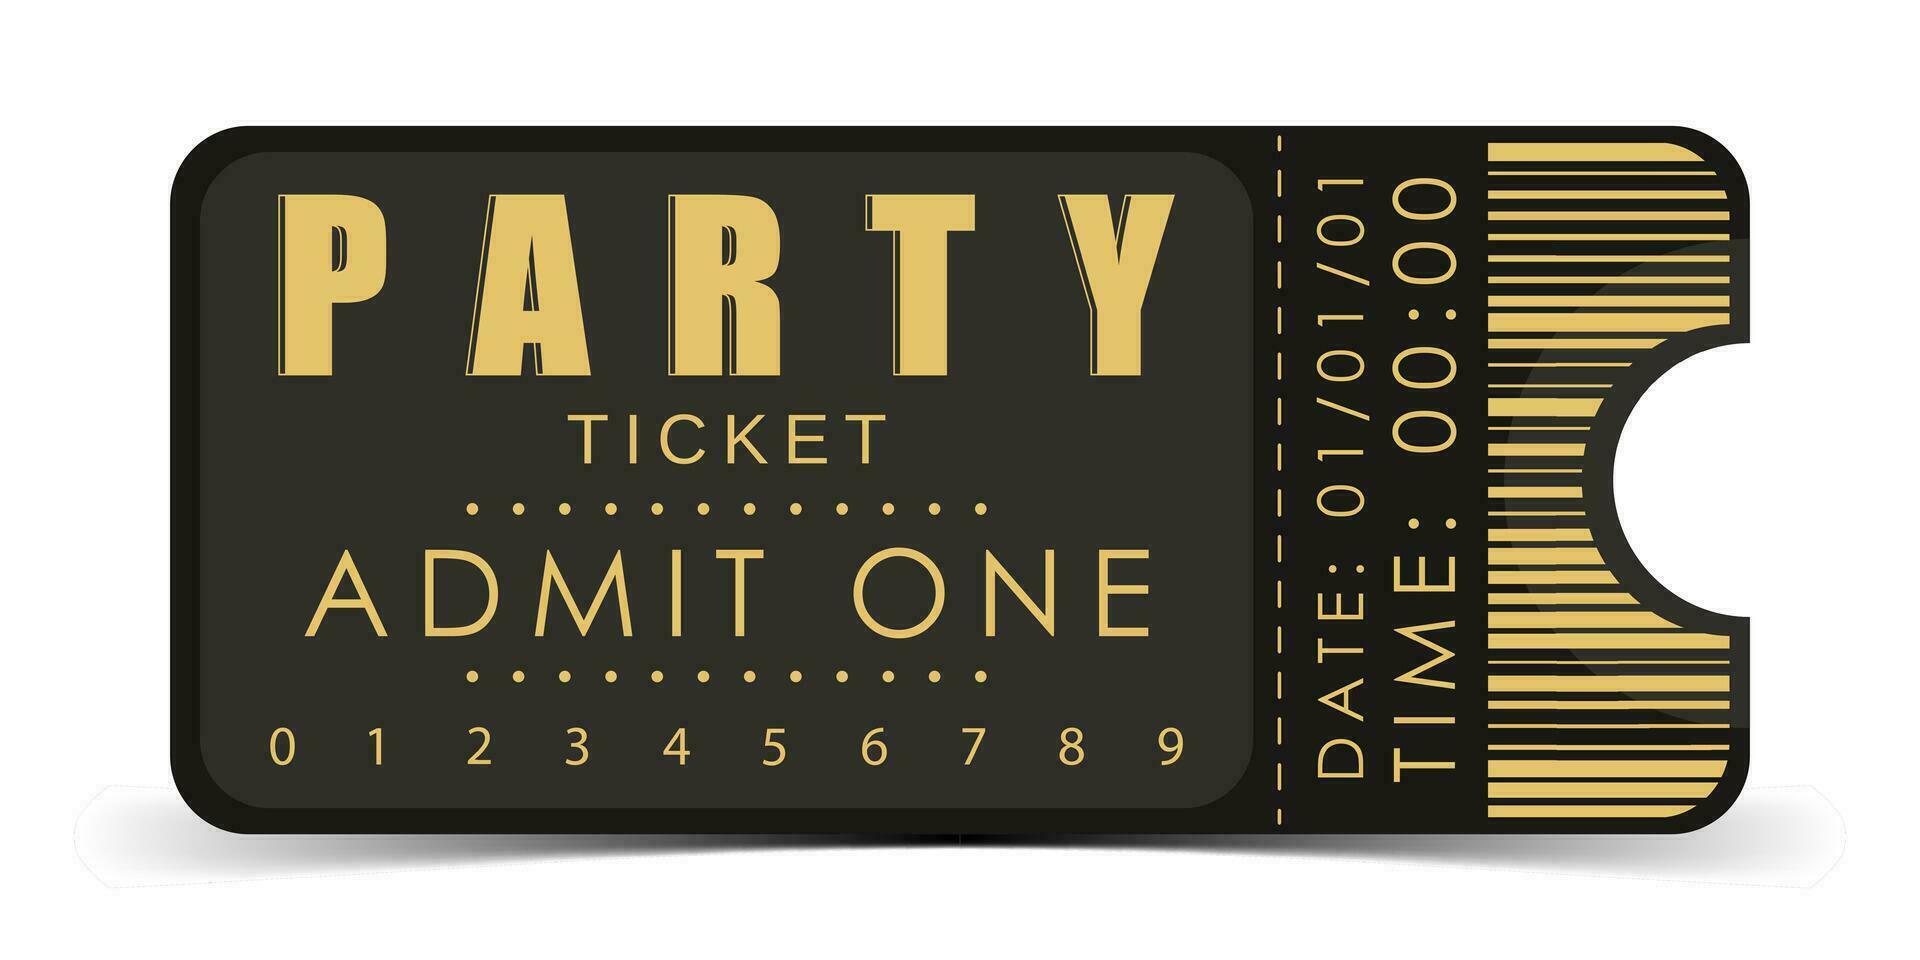 Sample ticket to enter the party. Modern ticket card template. Vector illustration.